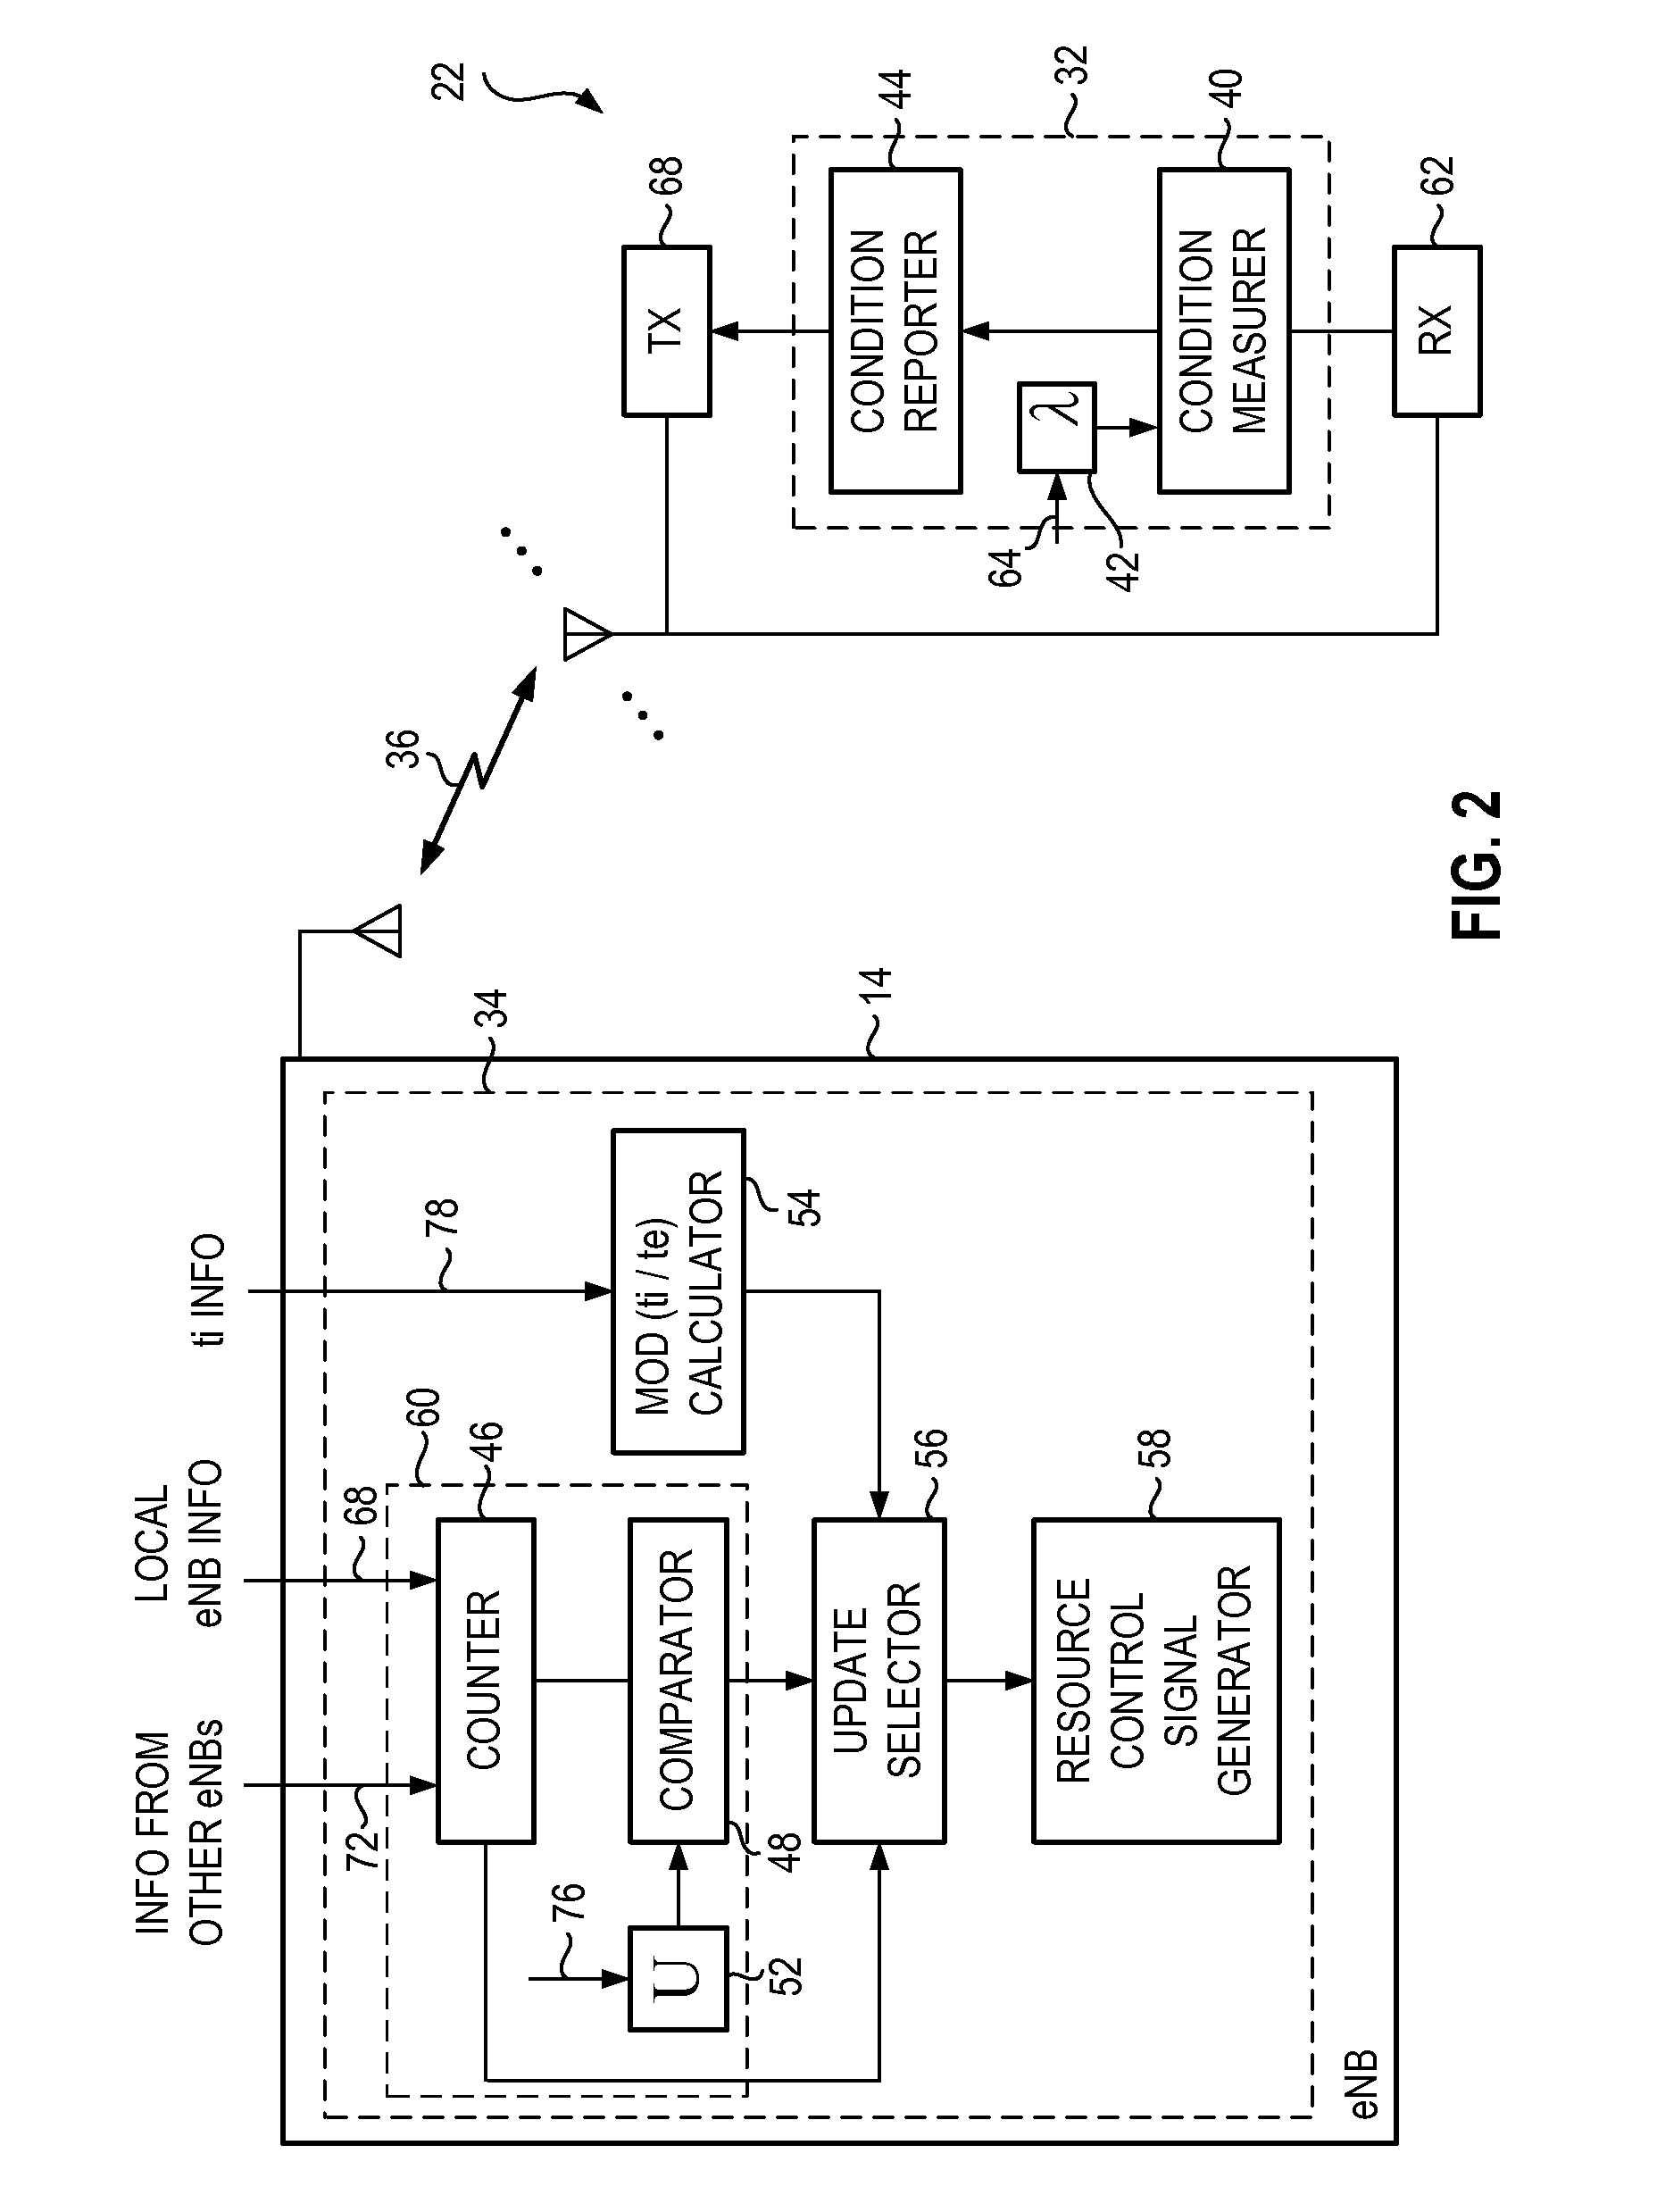 Apparatus and method for providing uplink interference coordination in a radio communication system